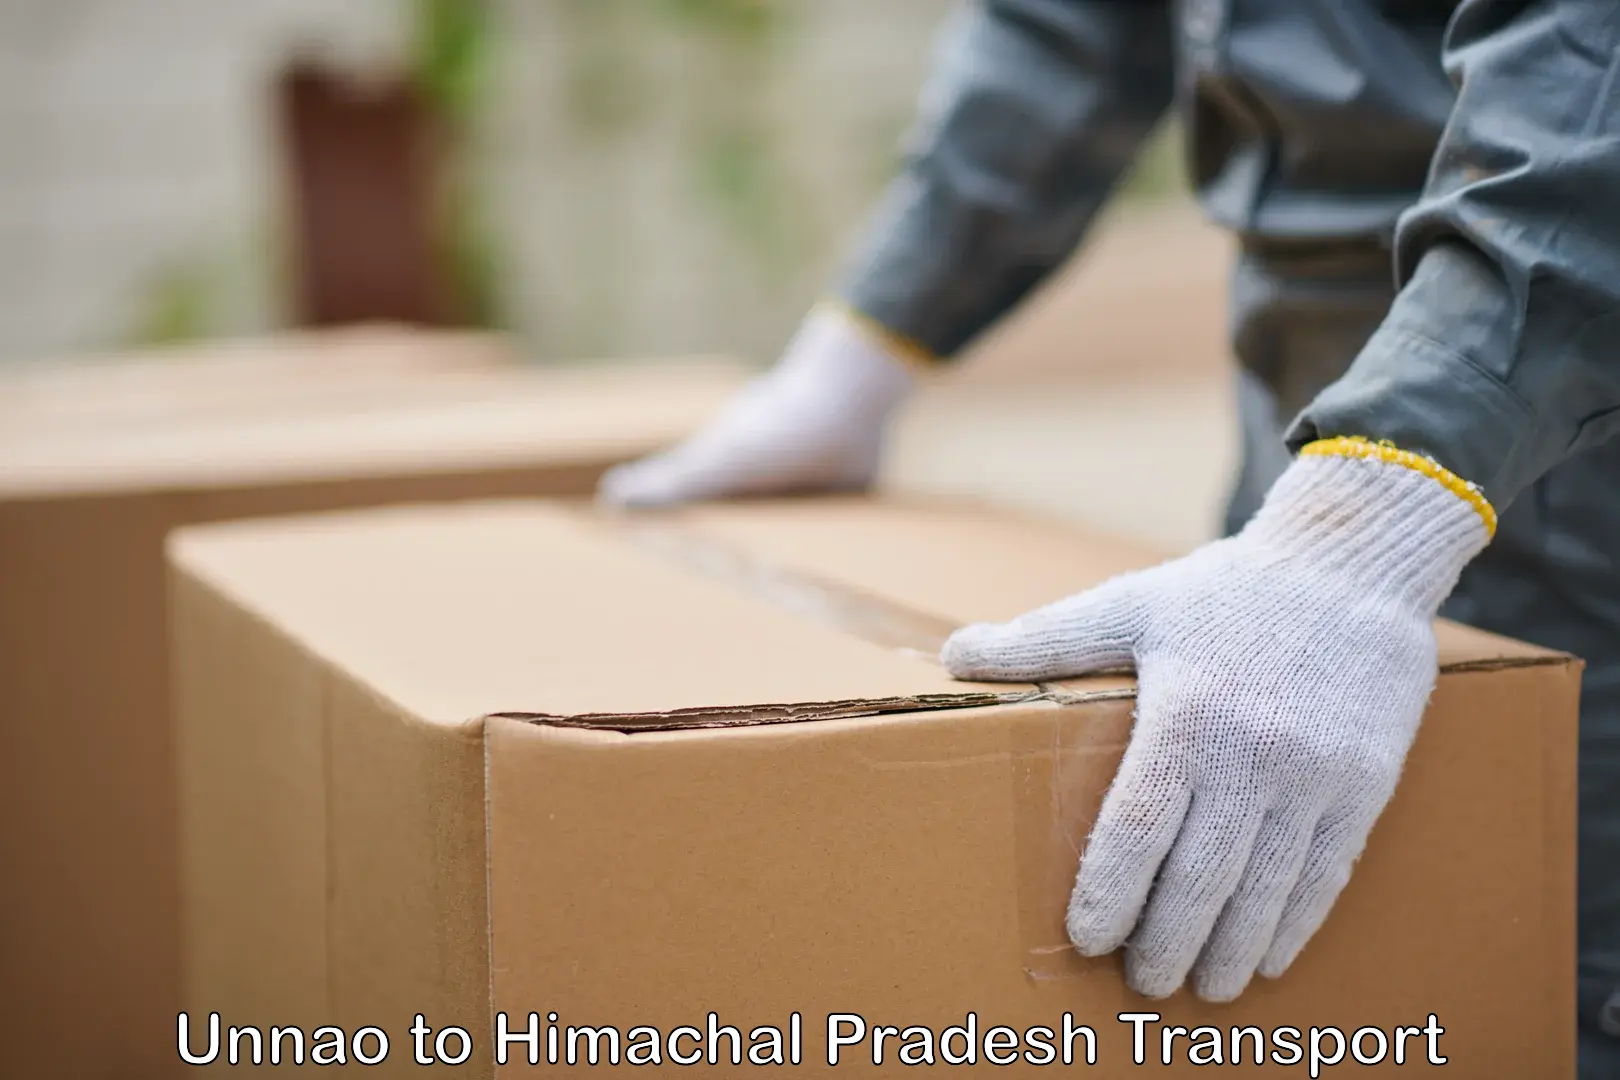 Truck transport companies in India Unnao to Himachal Pradesh